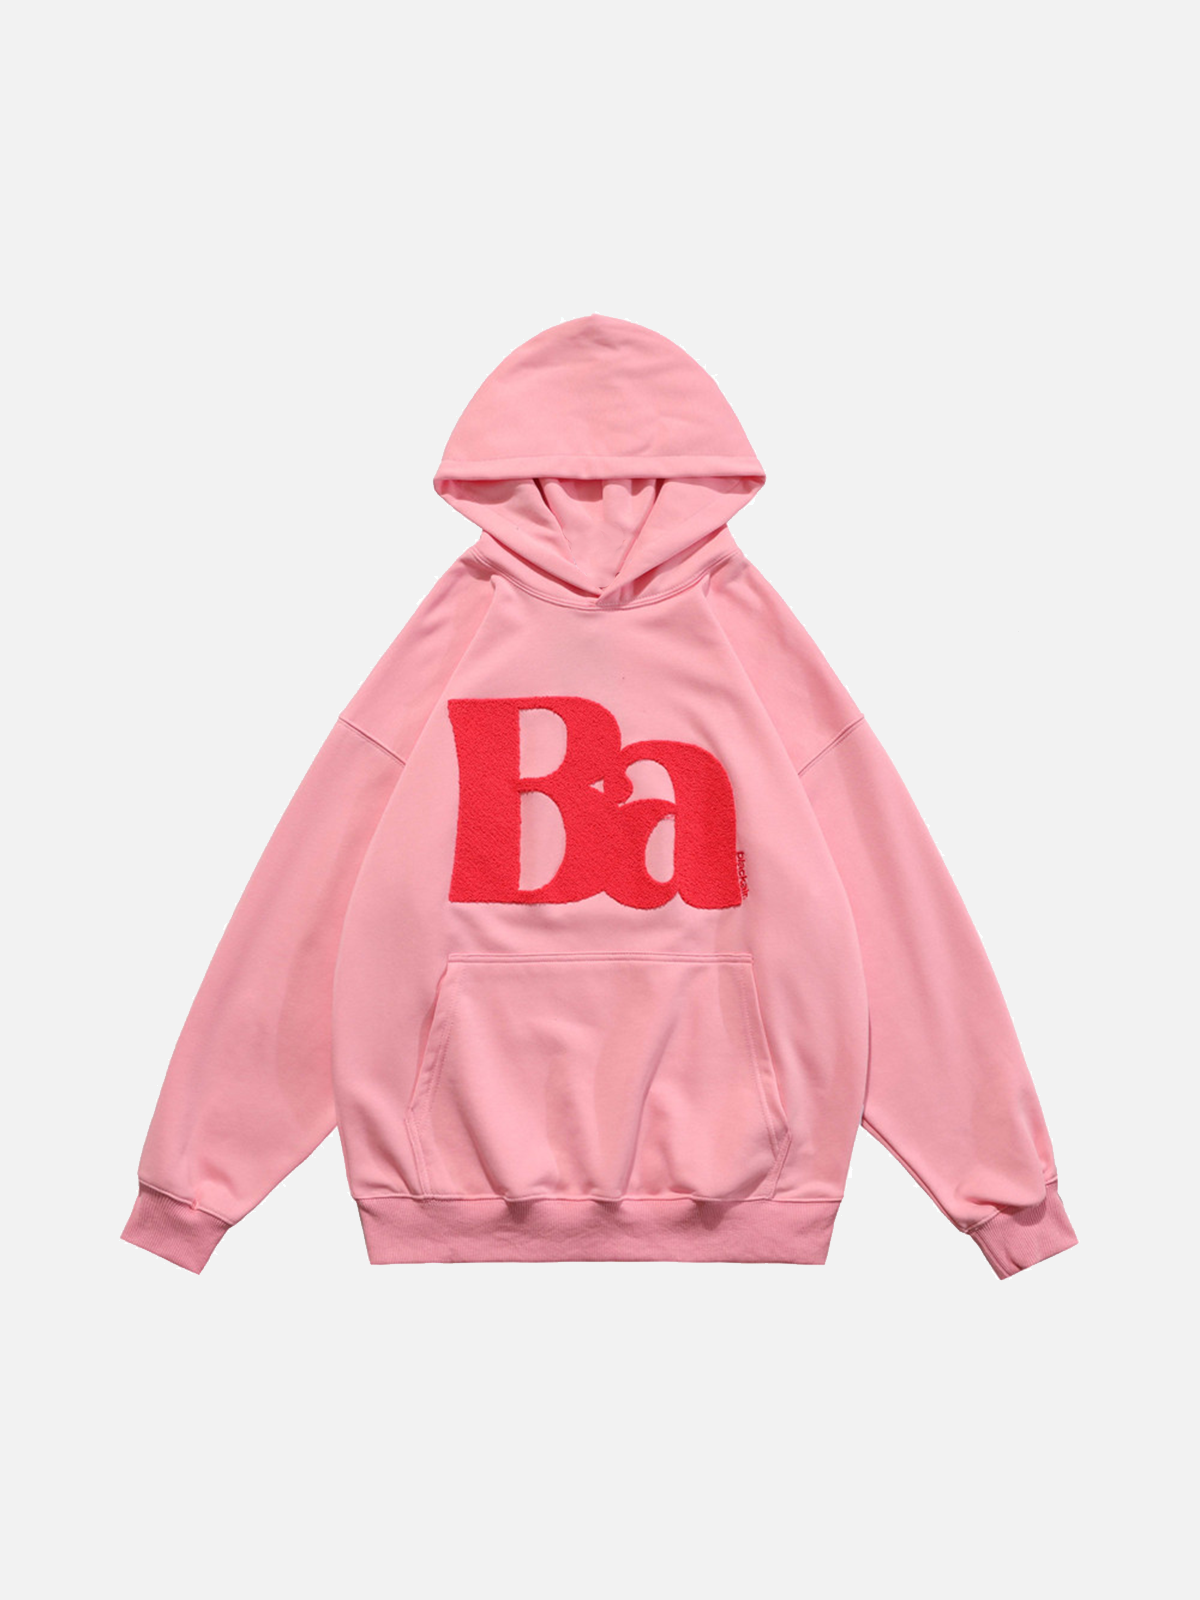 Faire Echo "BA" Letter Embroidery Hoodie